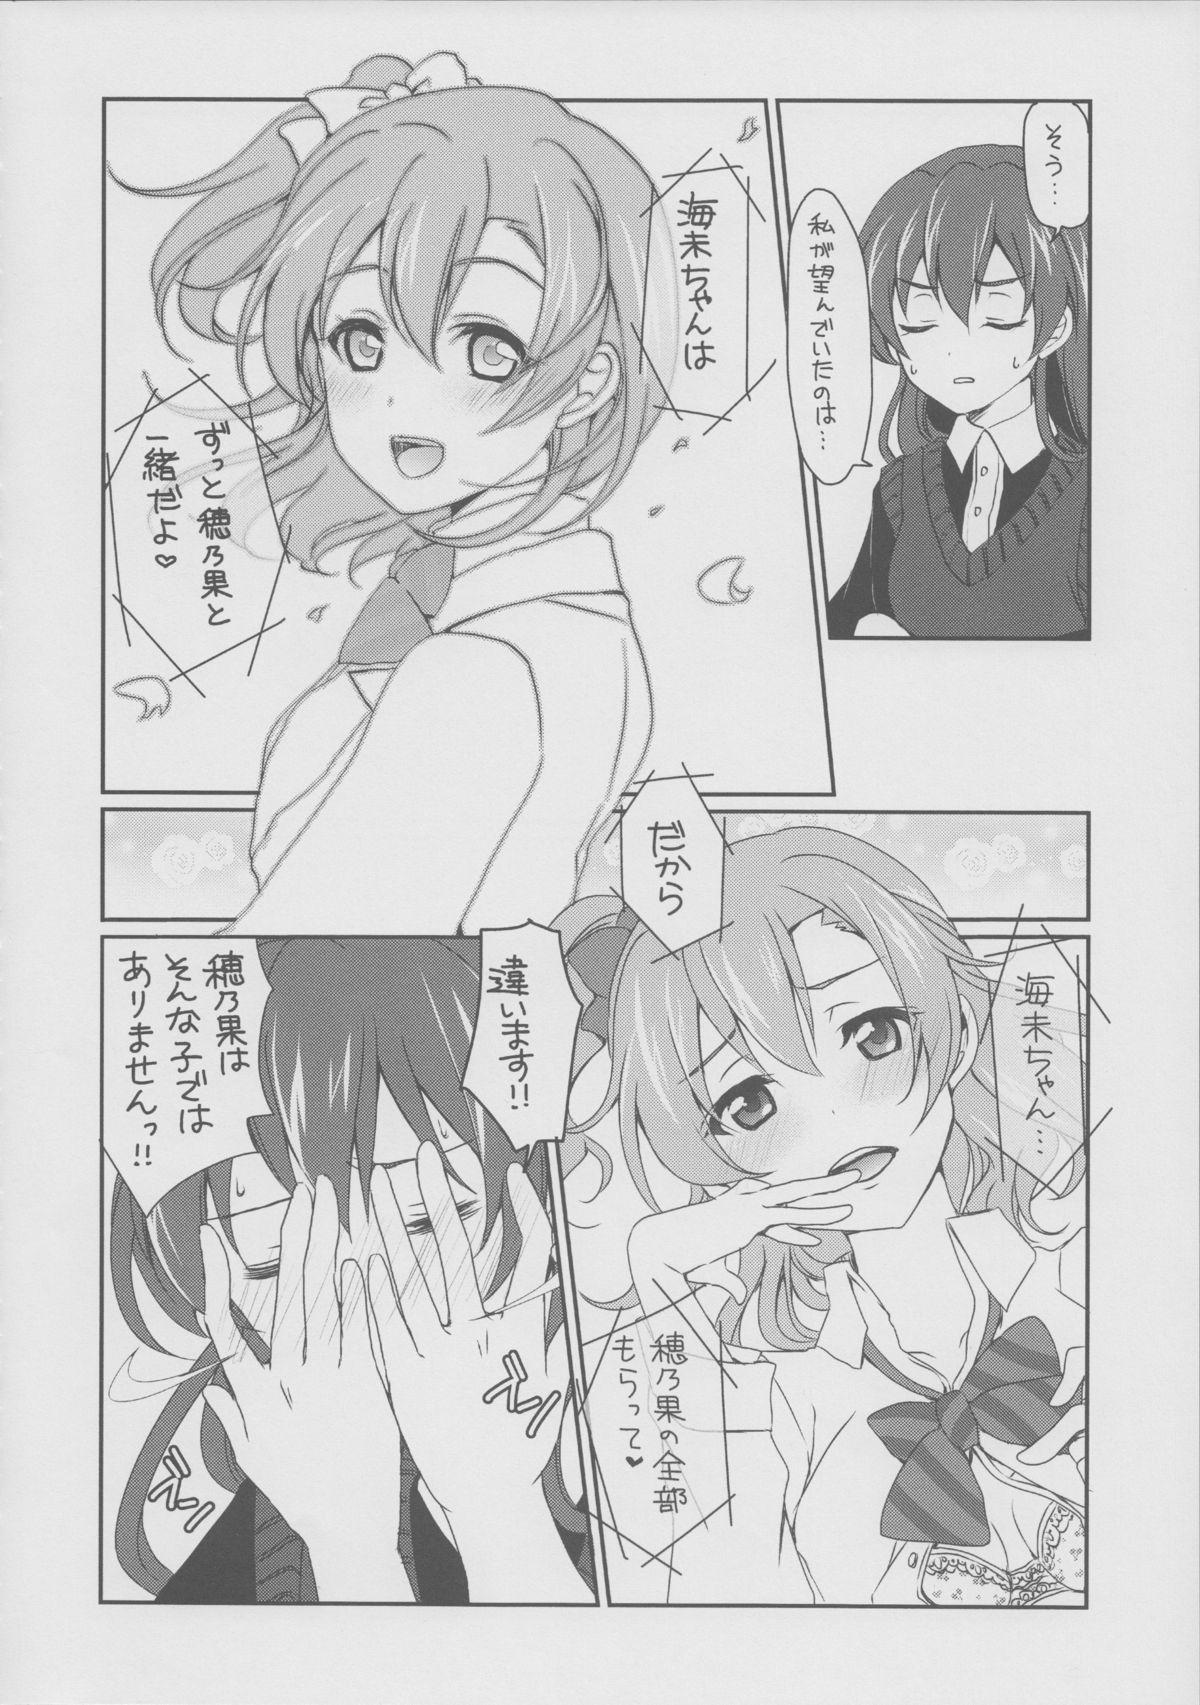 Chacal Mega μ'2Y - Love live Gostoso - Page 7